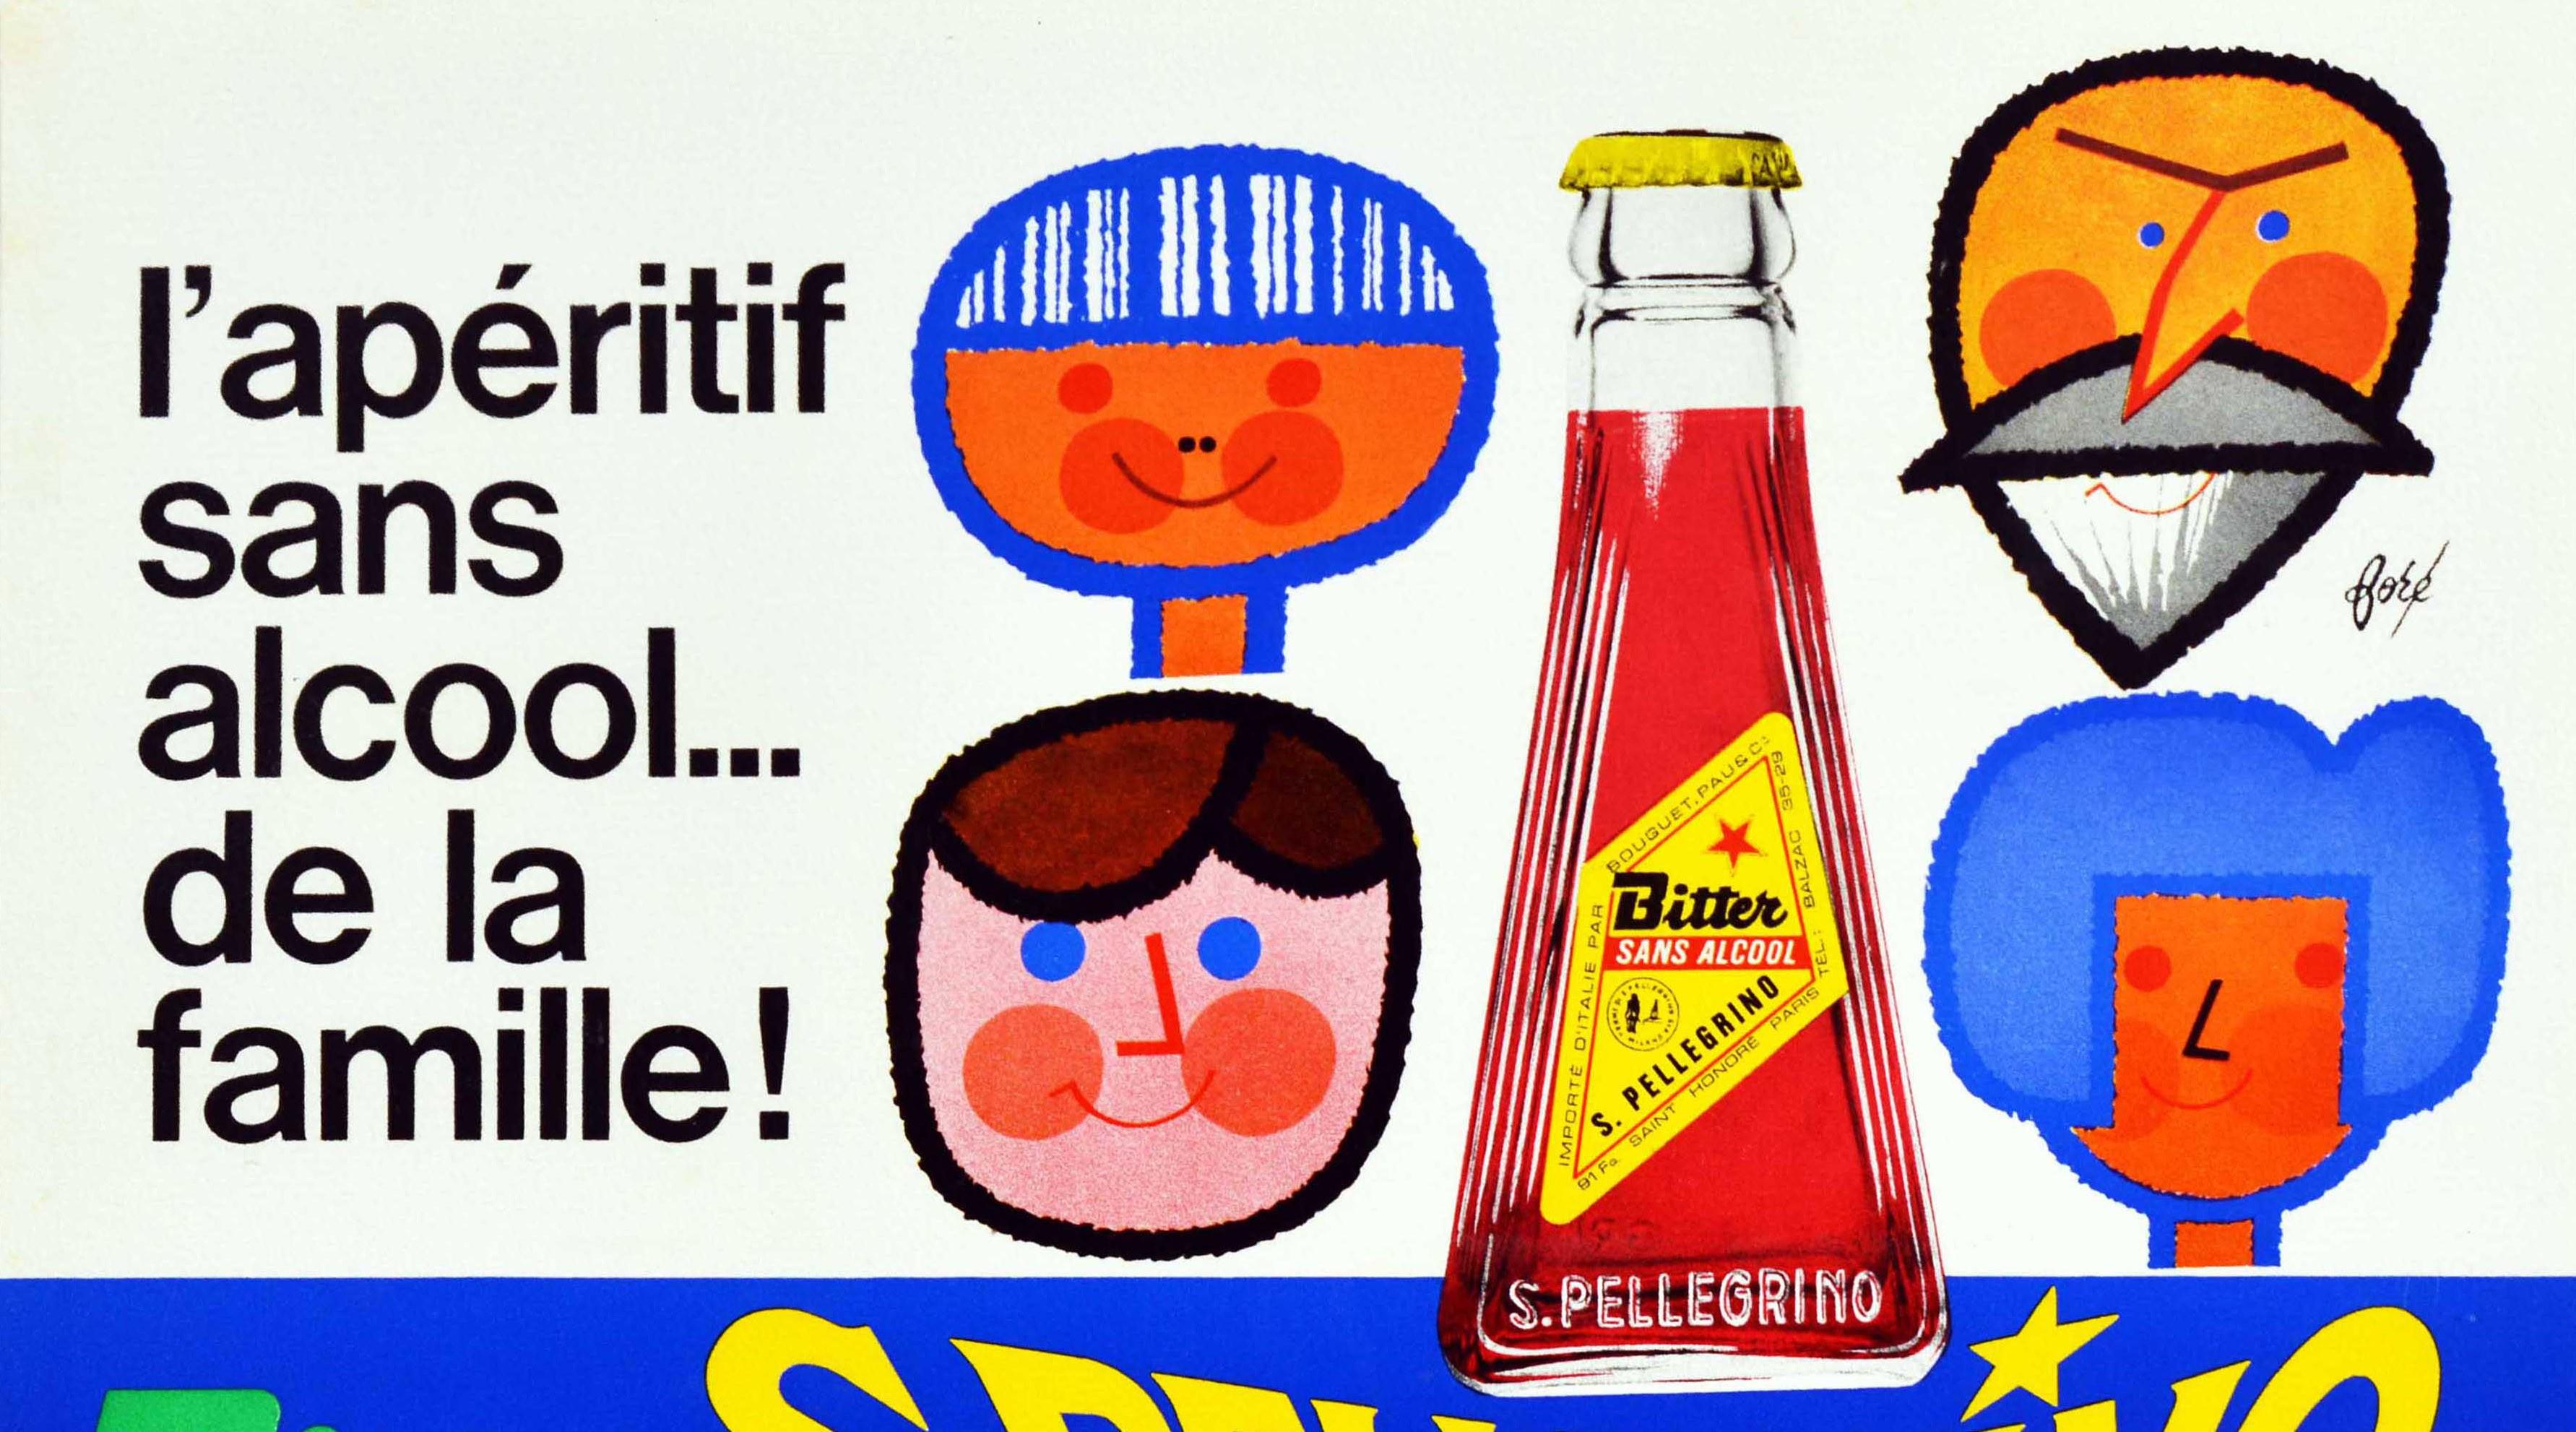 Original Vintage Drink Poster San Pellegrino Bitter Alcohol Free Family Aperitif - Print by Unknown